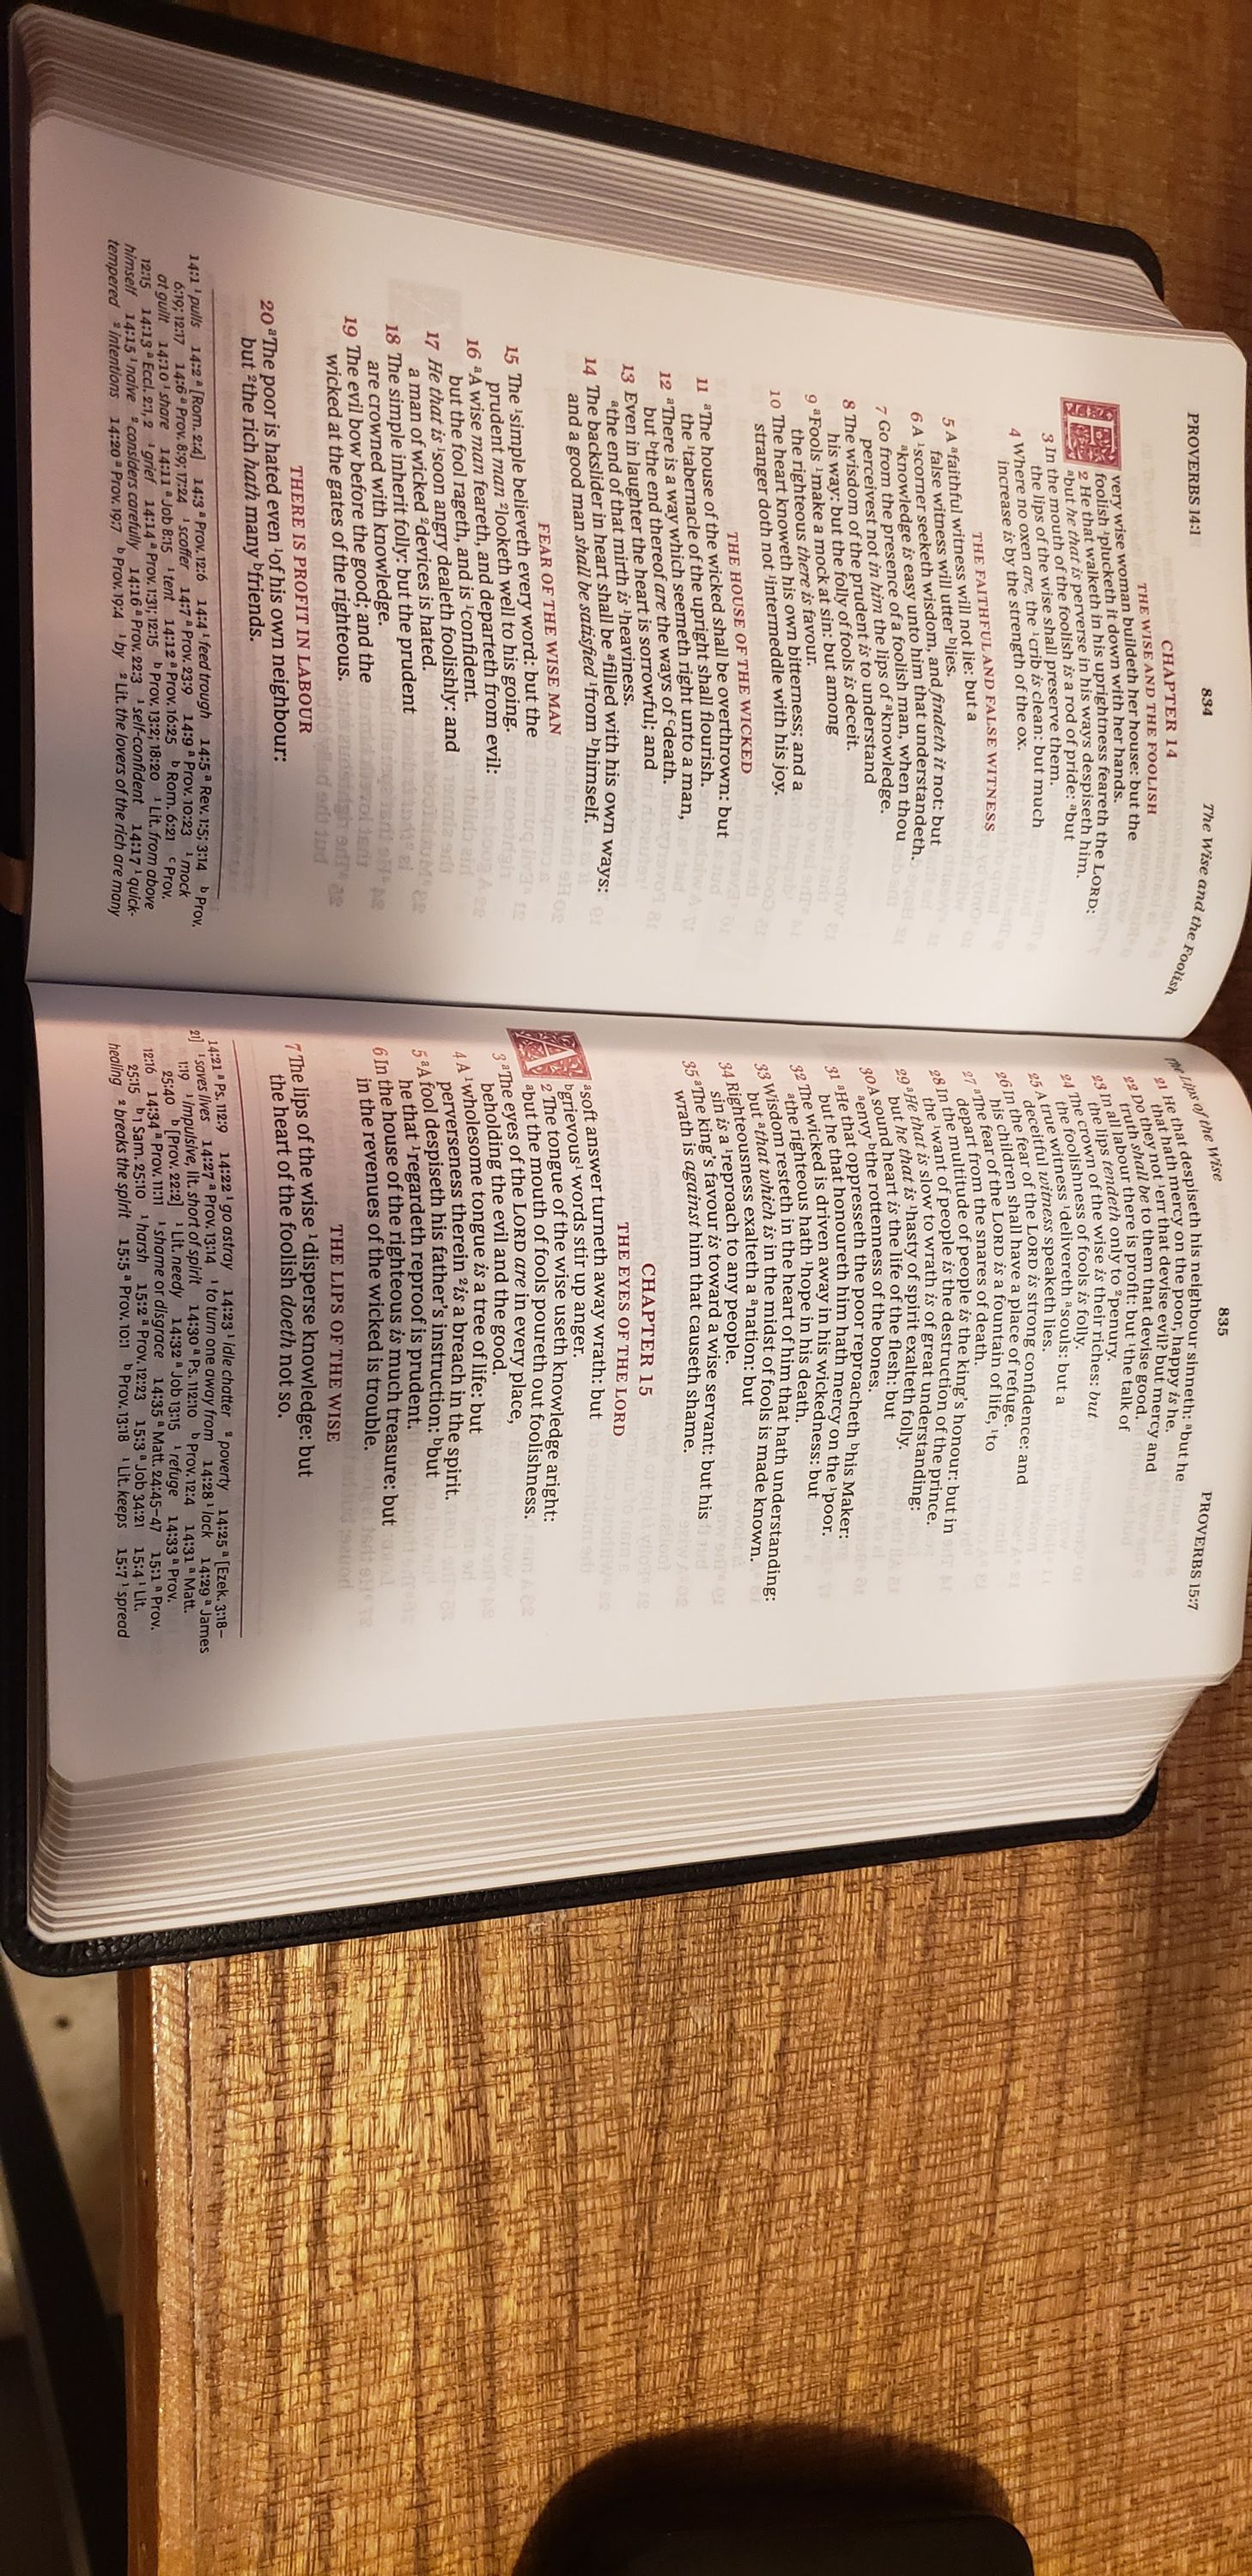 Open bible showing Proverbs